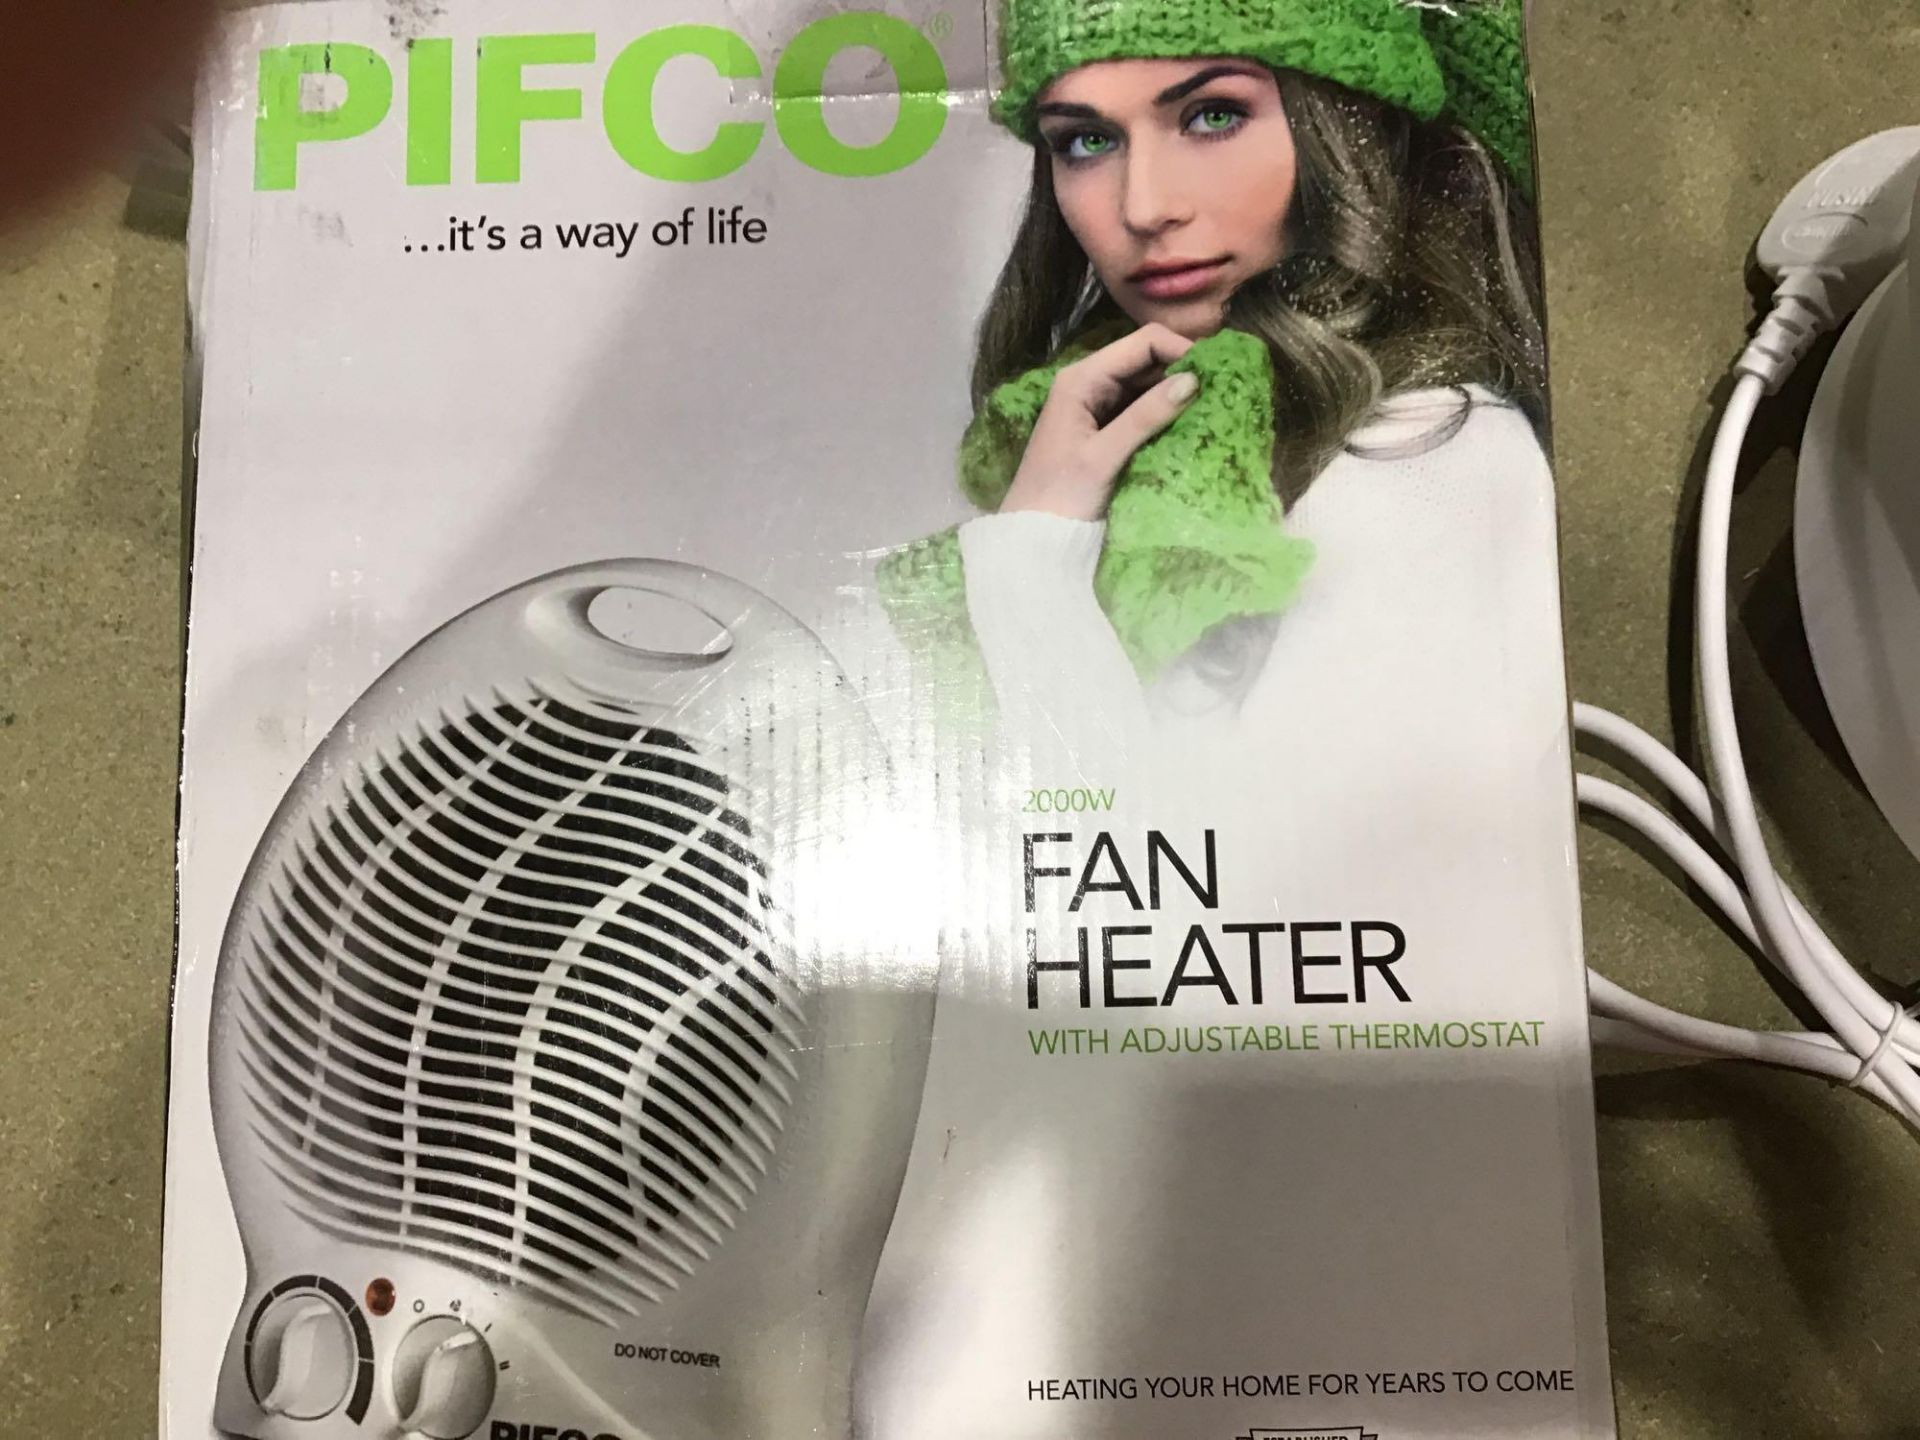 Pifco Upright Portable Fan Heater and Air Cooler, Adjustable Thermostat 2000 W, White £12.99 RRP - Image 3 of 4